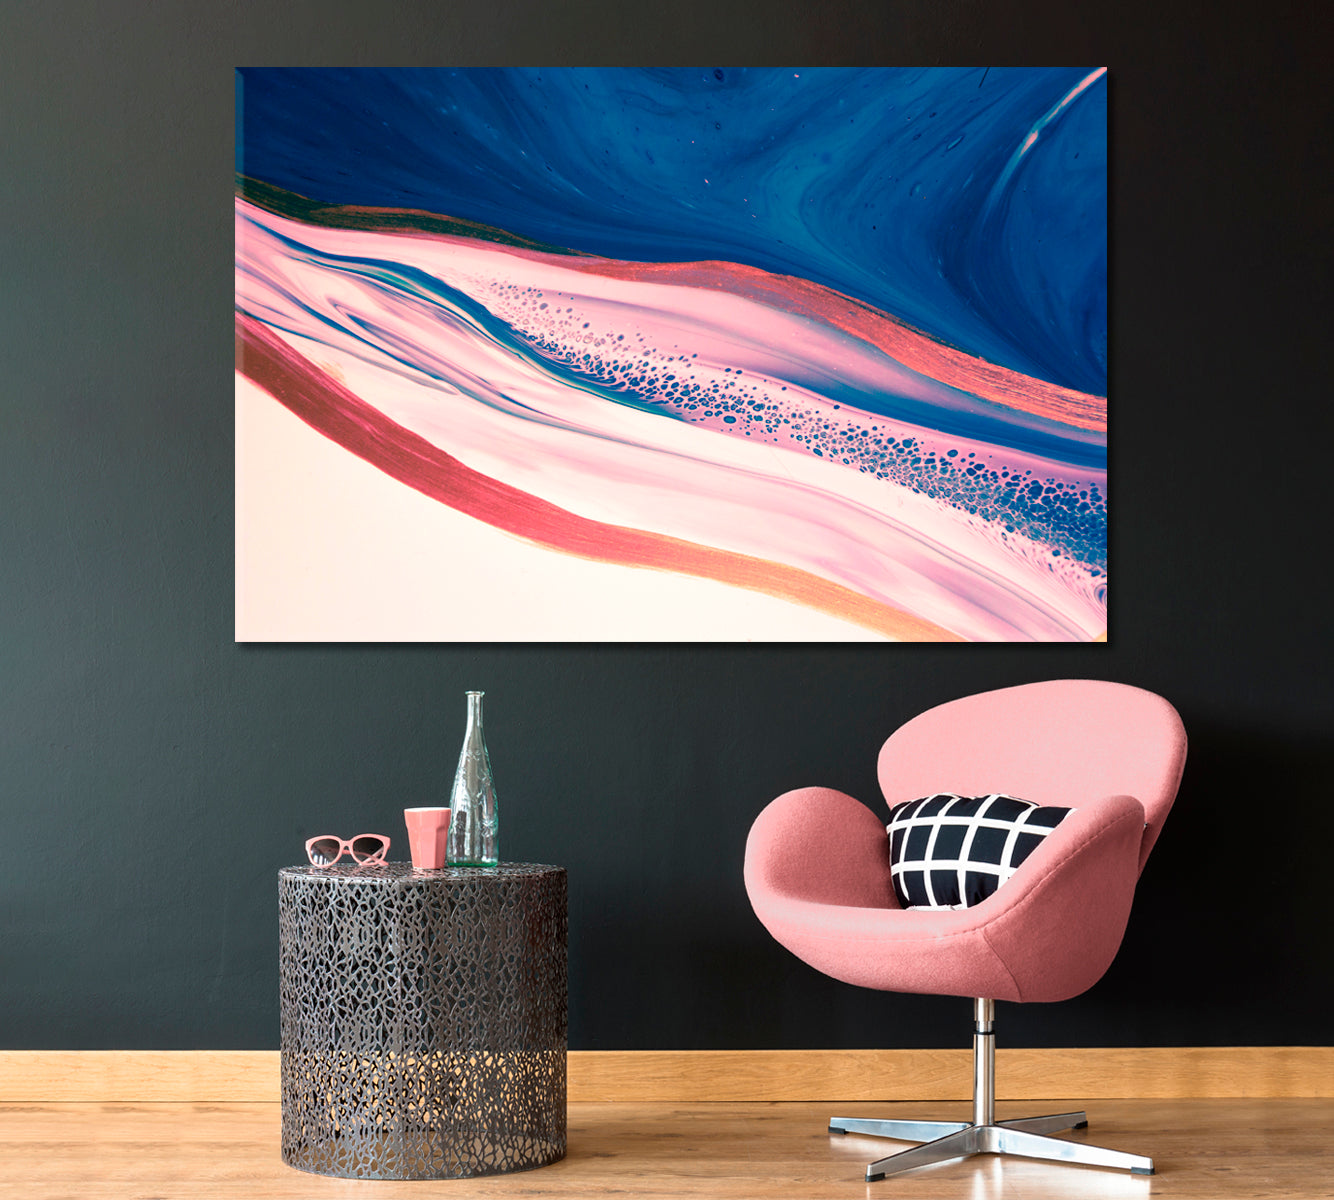 Minimalistic Blue & Pink Ink Pattern Canvas Print ArtLexy 1 Panel 24"x16" inches 